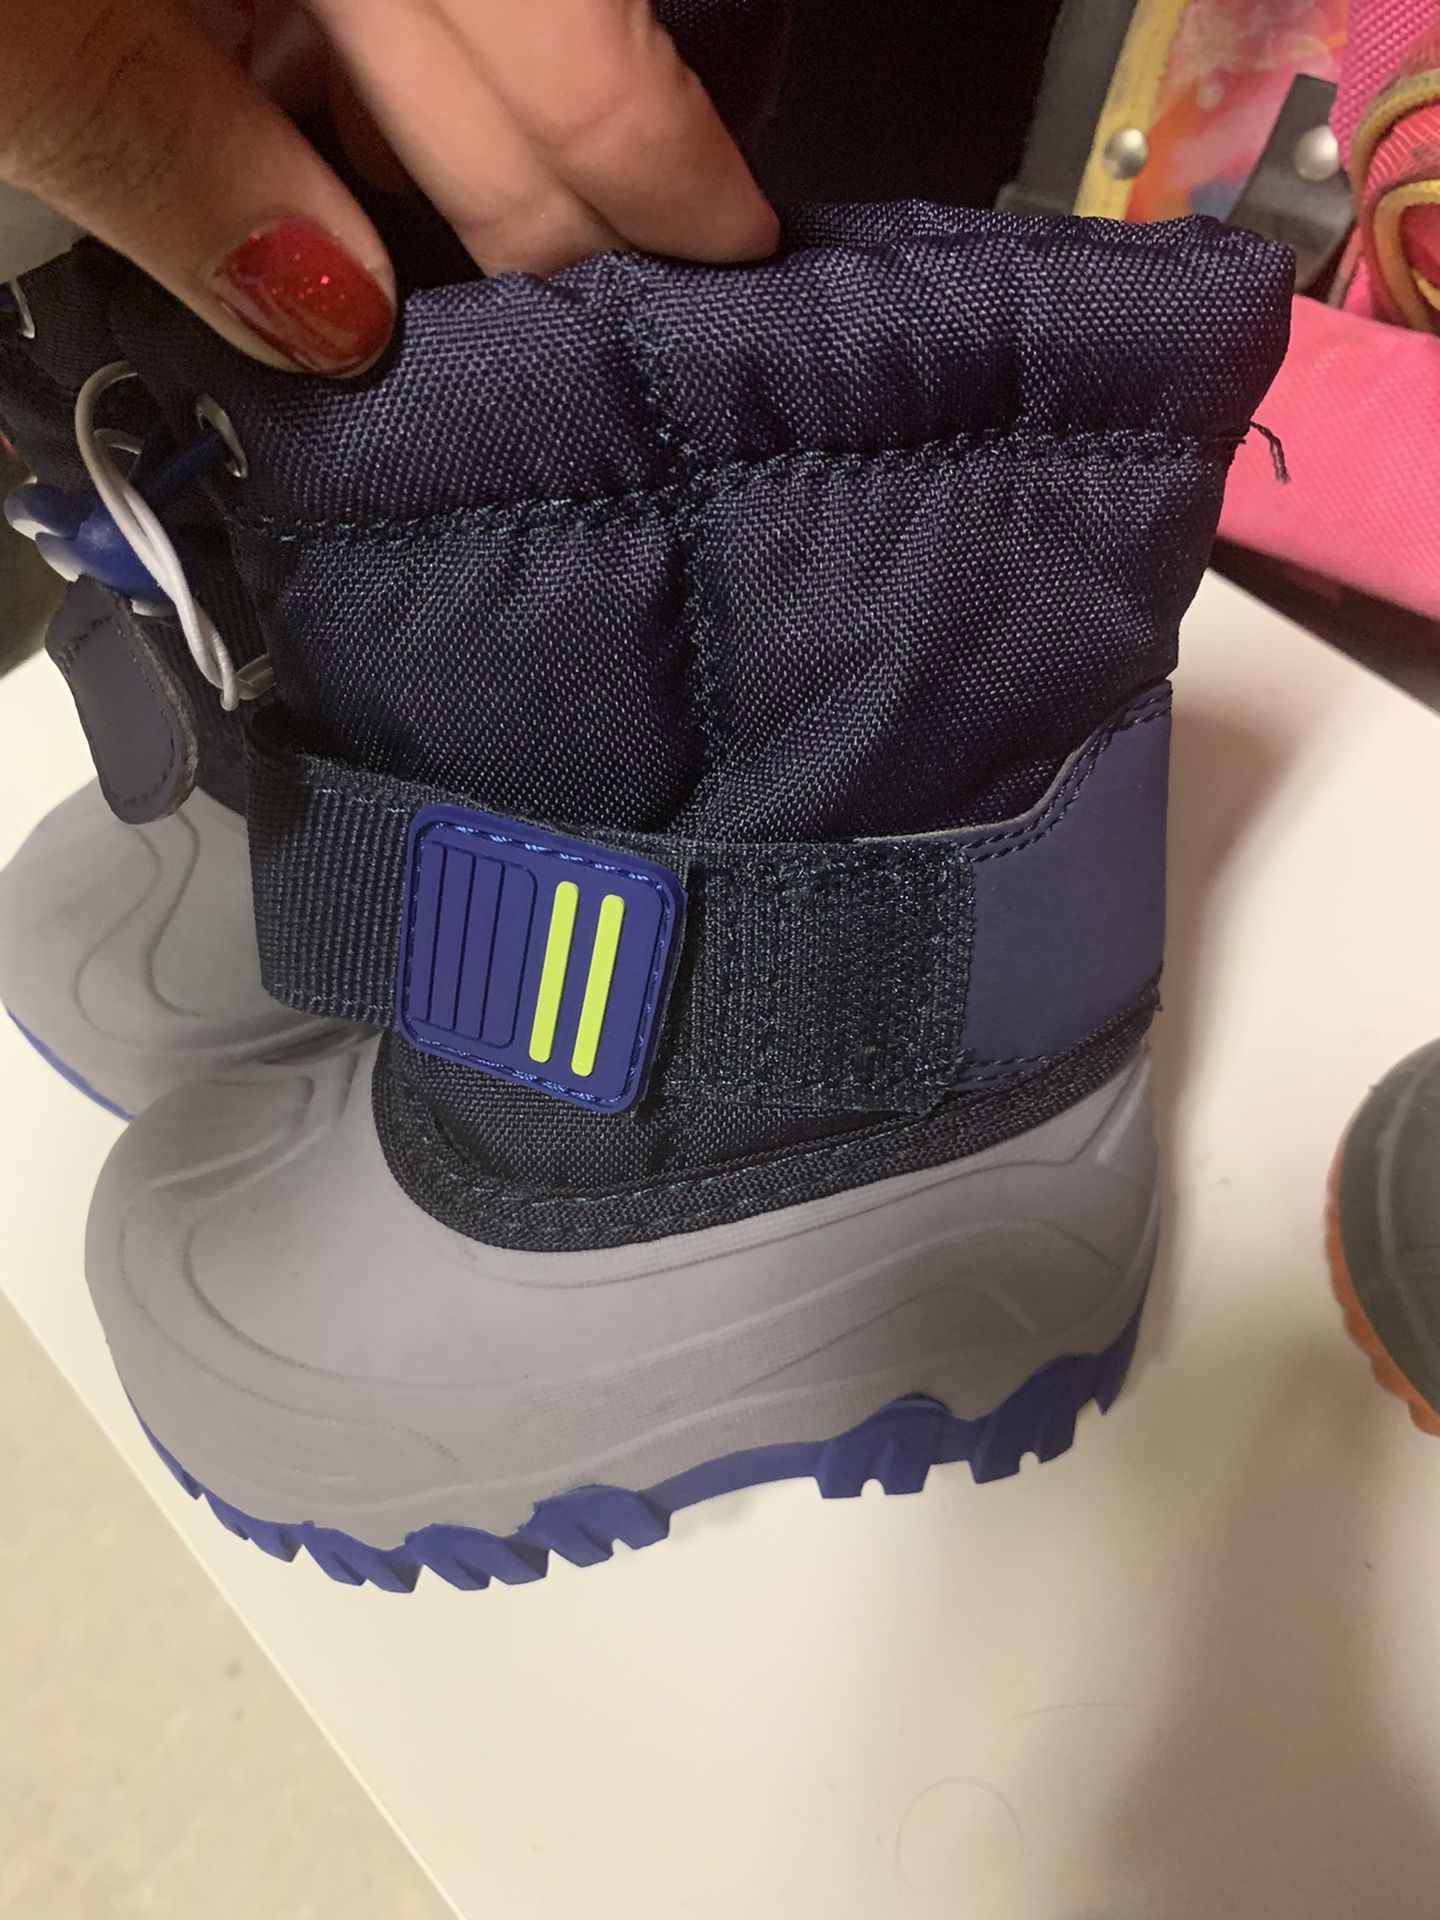 Snow boots new size 4c $20 firm